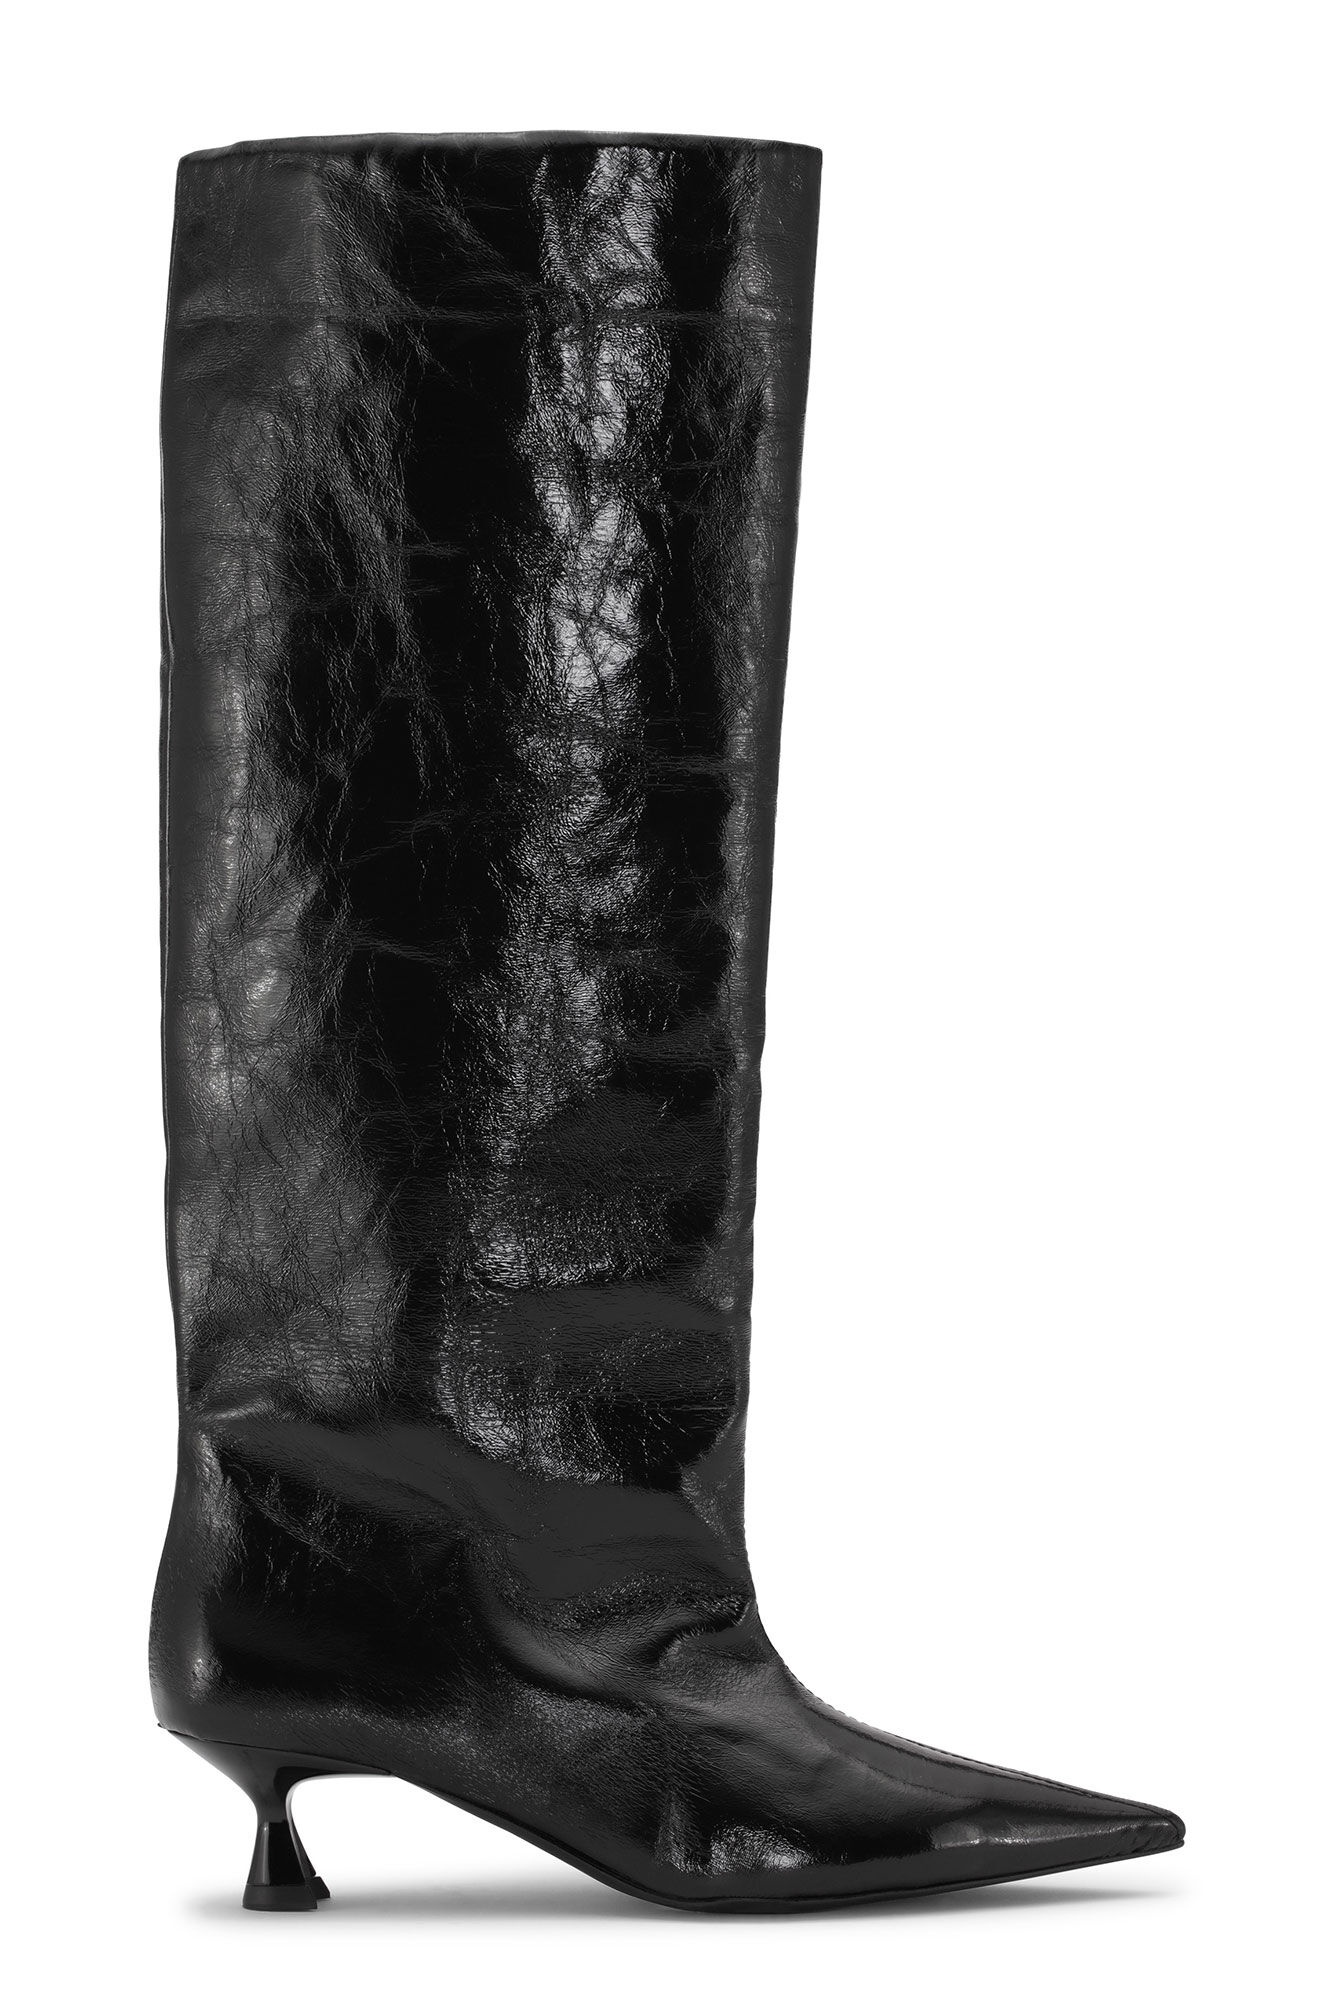 BLACK SOFT SLOUCHY HIGH SHAFT BOOTS - 1